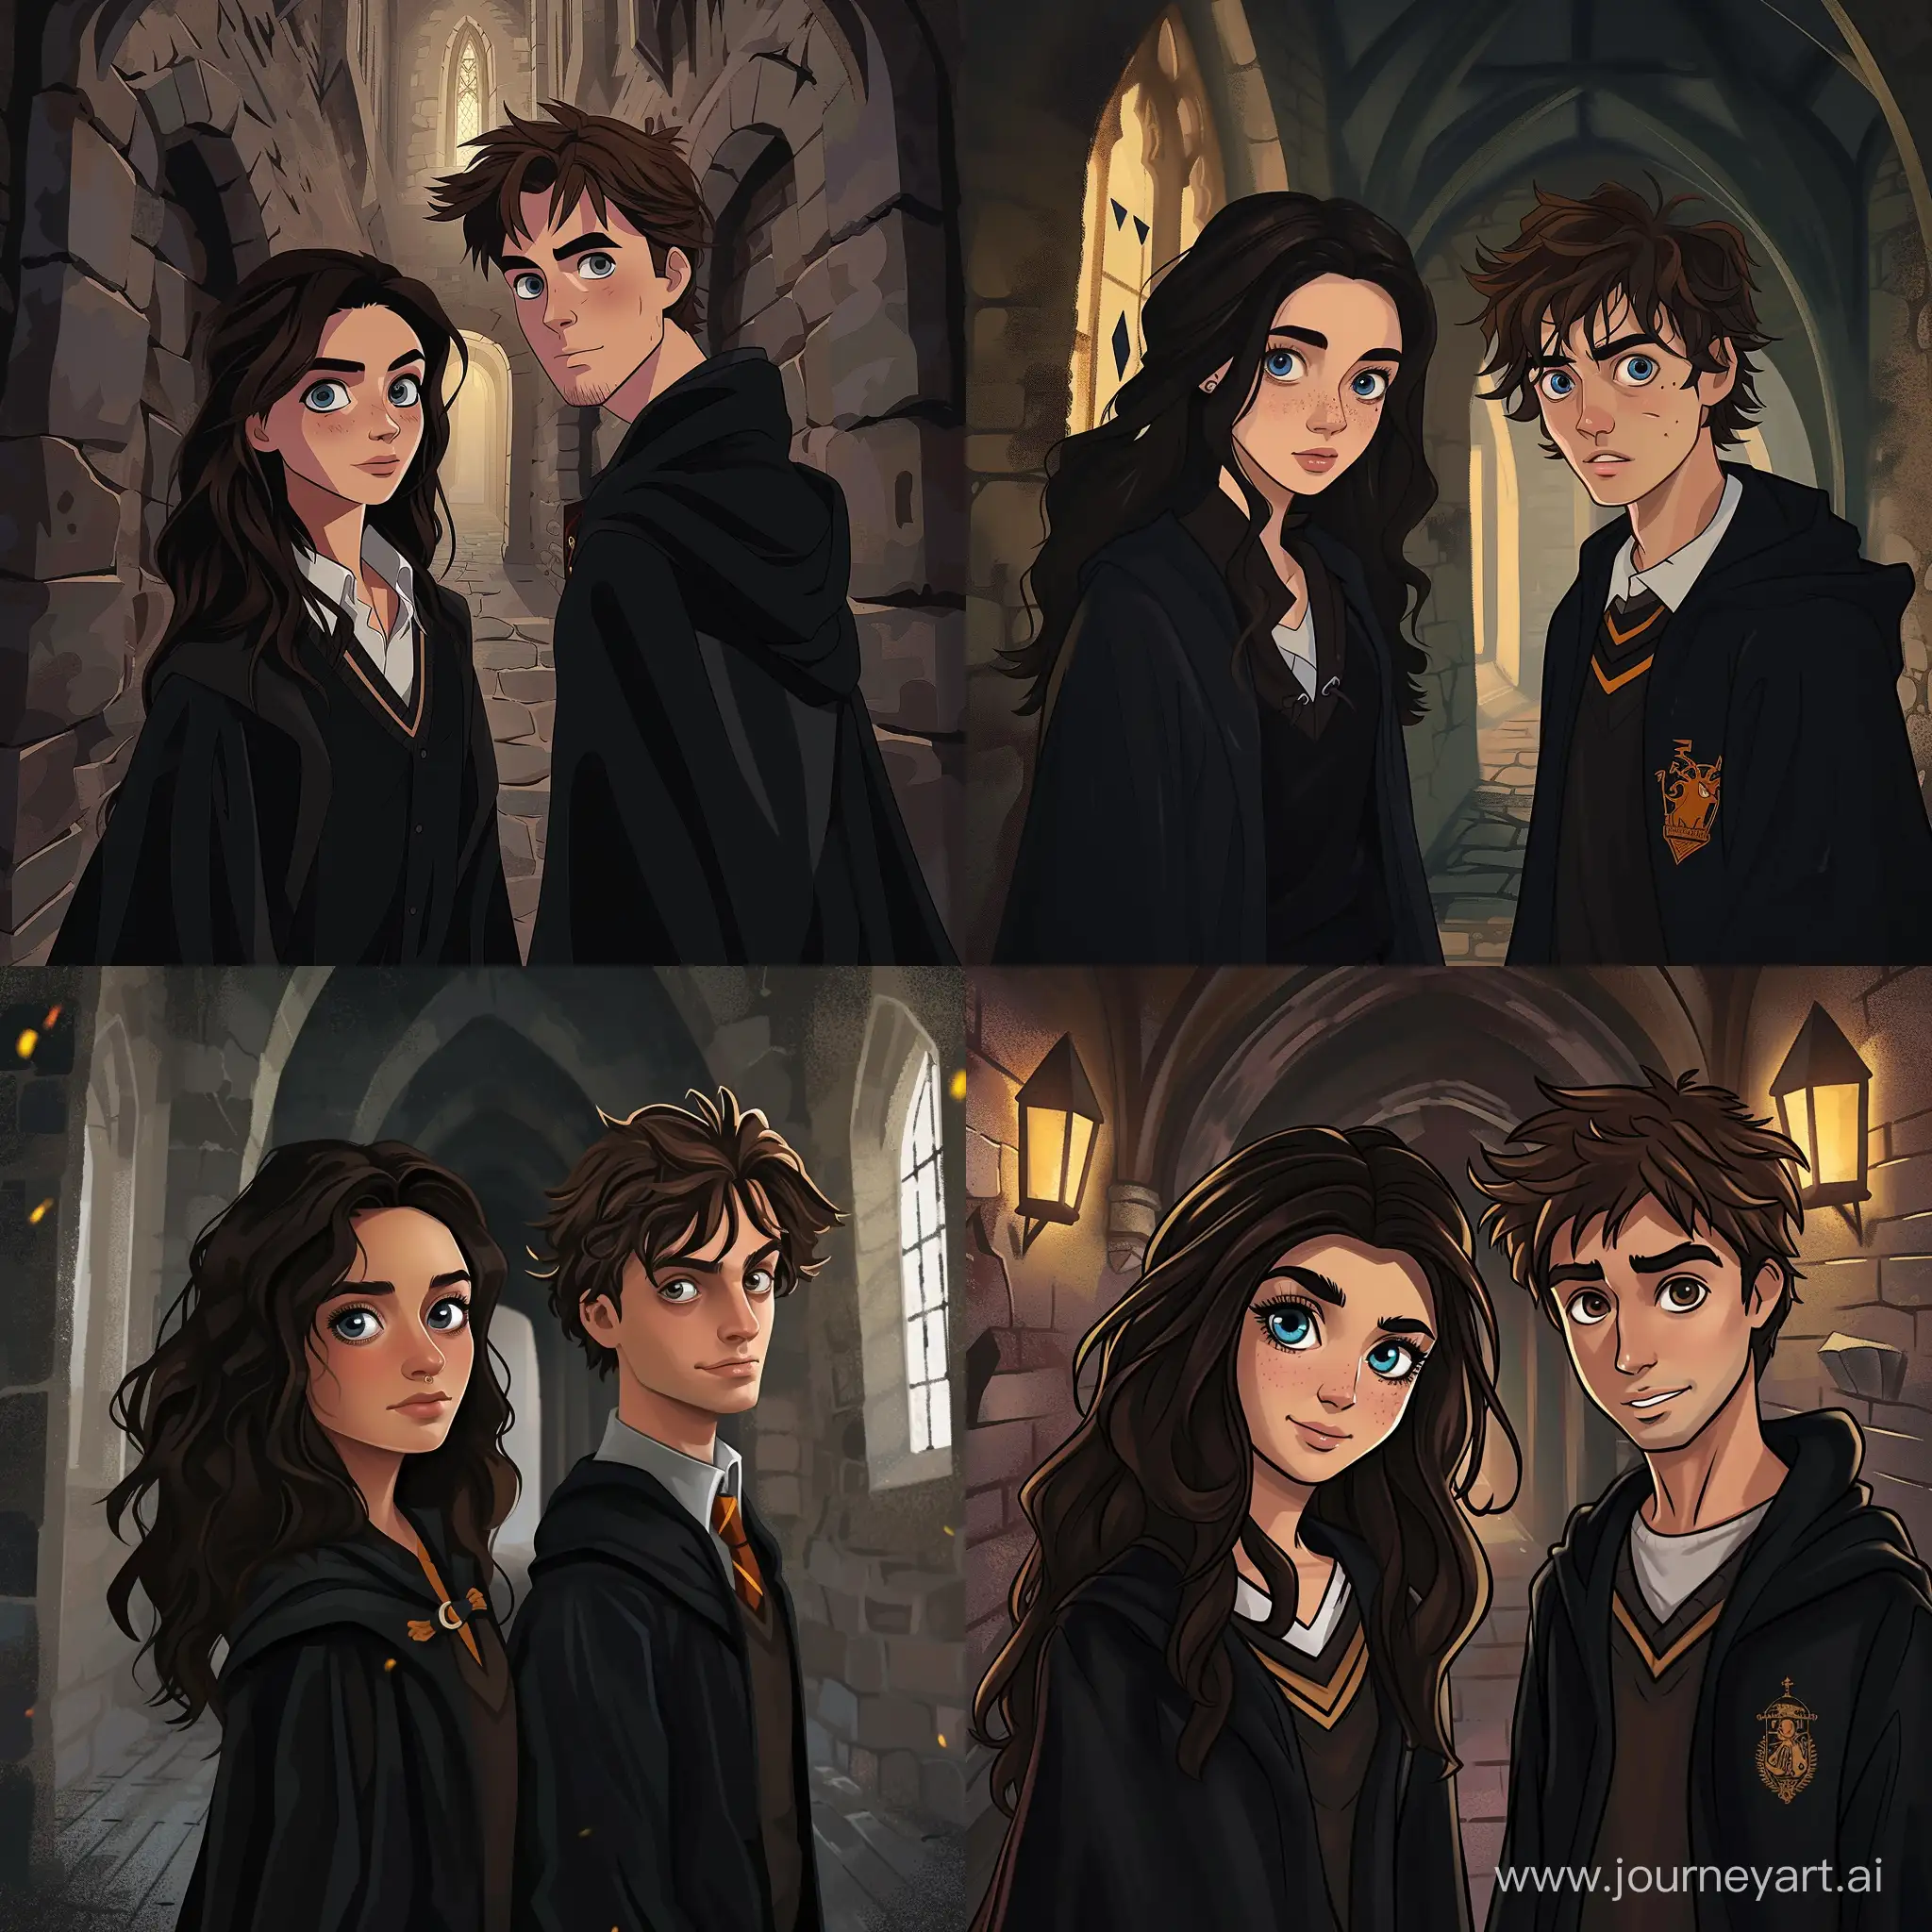 Friends, Hogwarts, Ravenclaw, teenagers, 14 years old, beautiful girl, dark brown hair, blue eyes, black robe, guy with disheveled straw-colored hair and brown eyes, black robe, castle corridor, full height, high quality, high detail, cartoon art